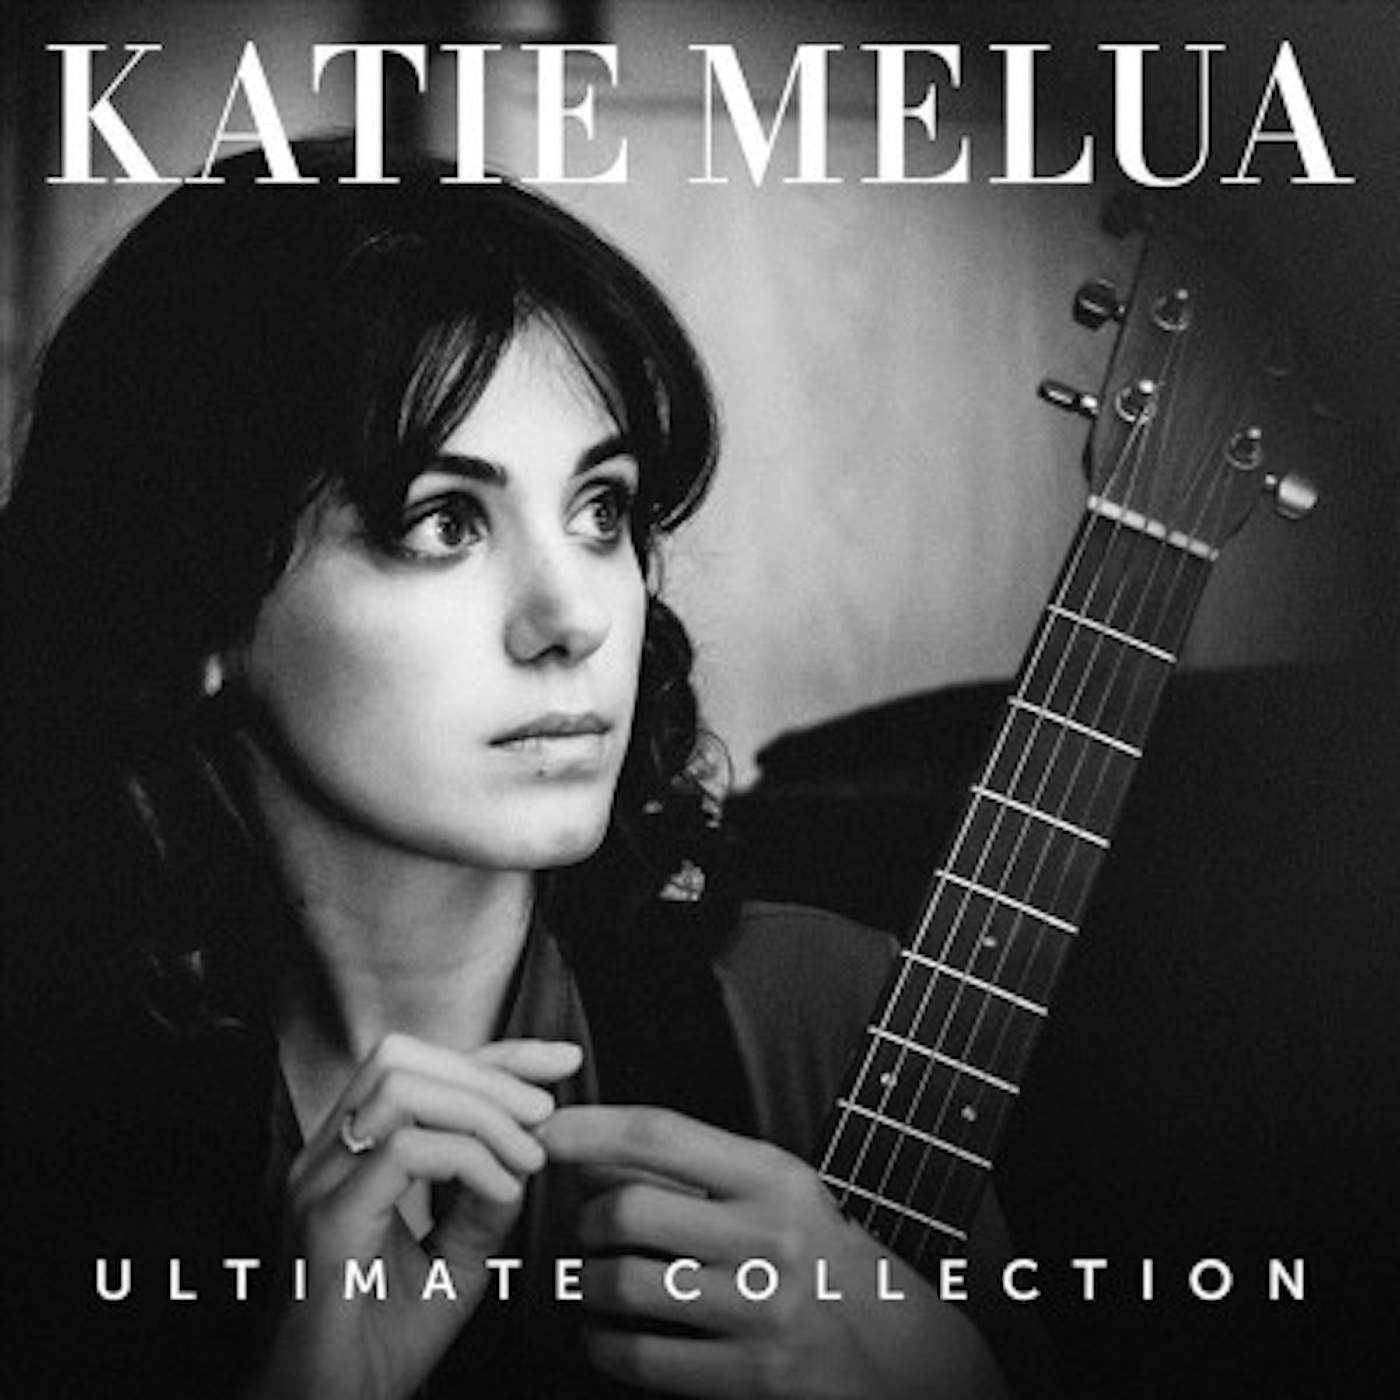 Katie Melua Ultimate Collection CD